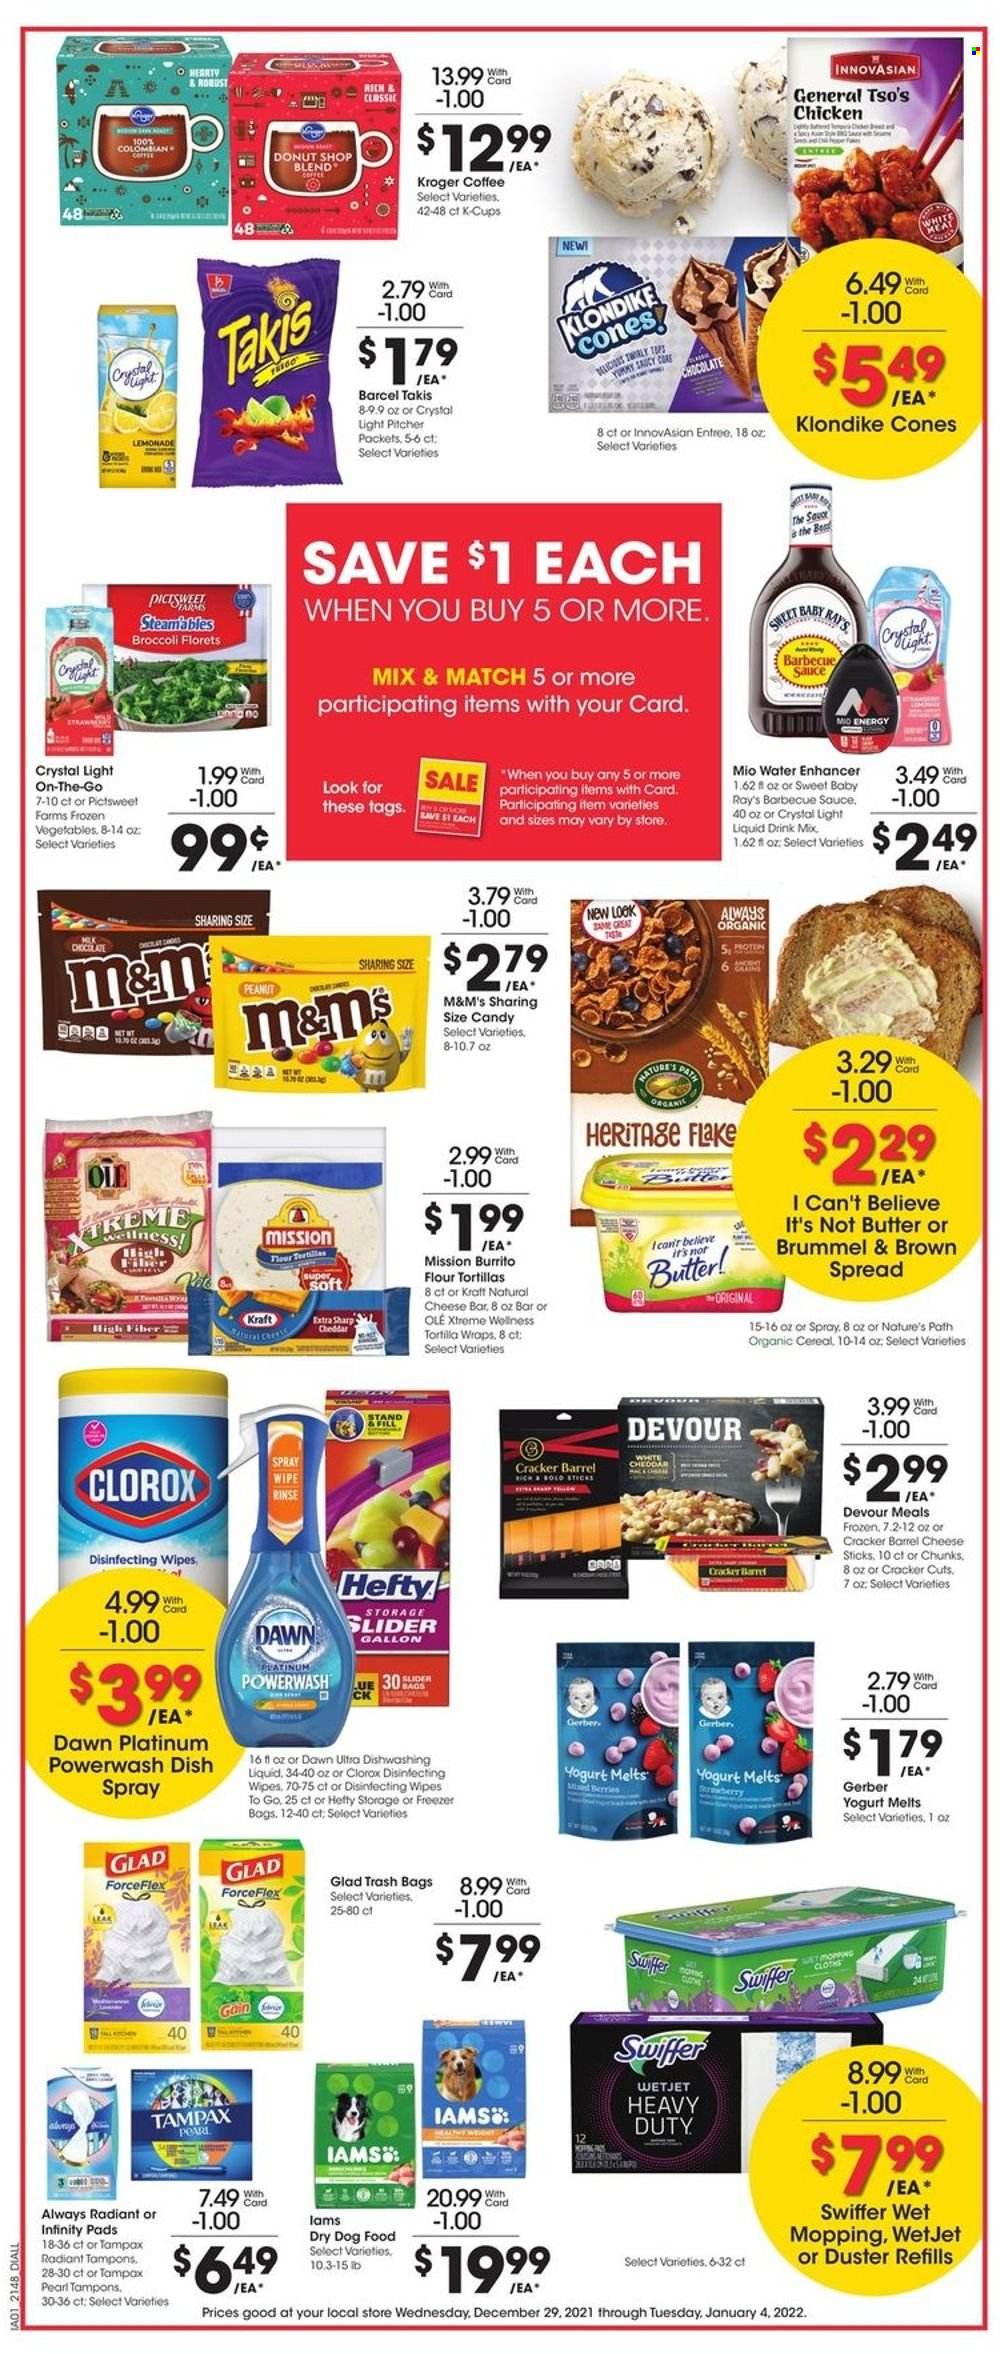 thumbnail - Baker's Flyer - 12/29/2021 - 01/04/2022 - Sales products - tortillas, flour tortillas, broccoli, burrito, Kraft®, cheese, yoghurt, butter, I Can't Believe It's Not Butter, Devour, cheese sticks, chocolate, M&M's, crackers, Gerber, cereals, BBQ sauce, lemonade, coffee, coffee capsules, K-Cups, wipes, Gain, Clorox, Swiffer, dishwashing liquid, Tampax, tampons, Infinity, Hefty, trash bags, gallon, duster, WetJet, pitcher, straw, animal food, dog food, dry dog food, Iams, freezer. Page 4.